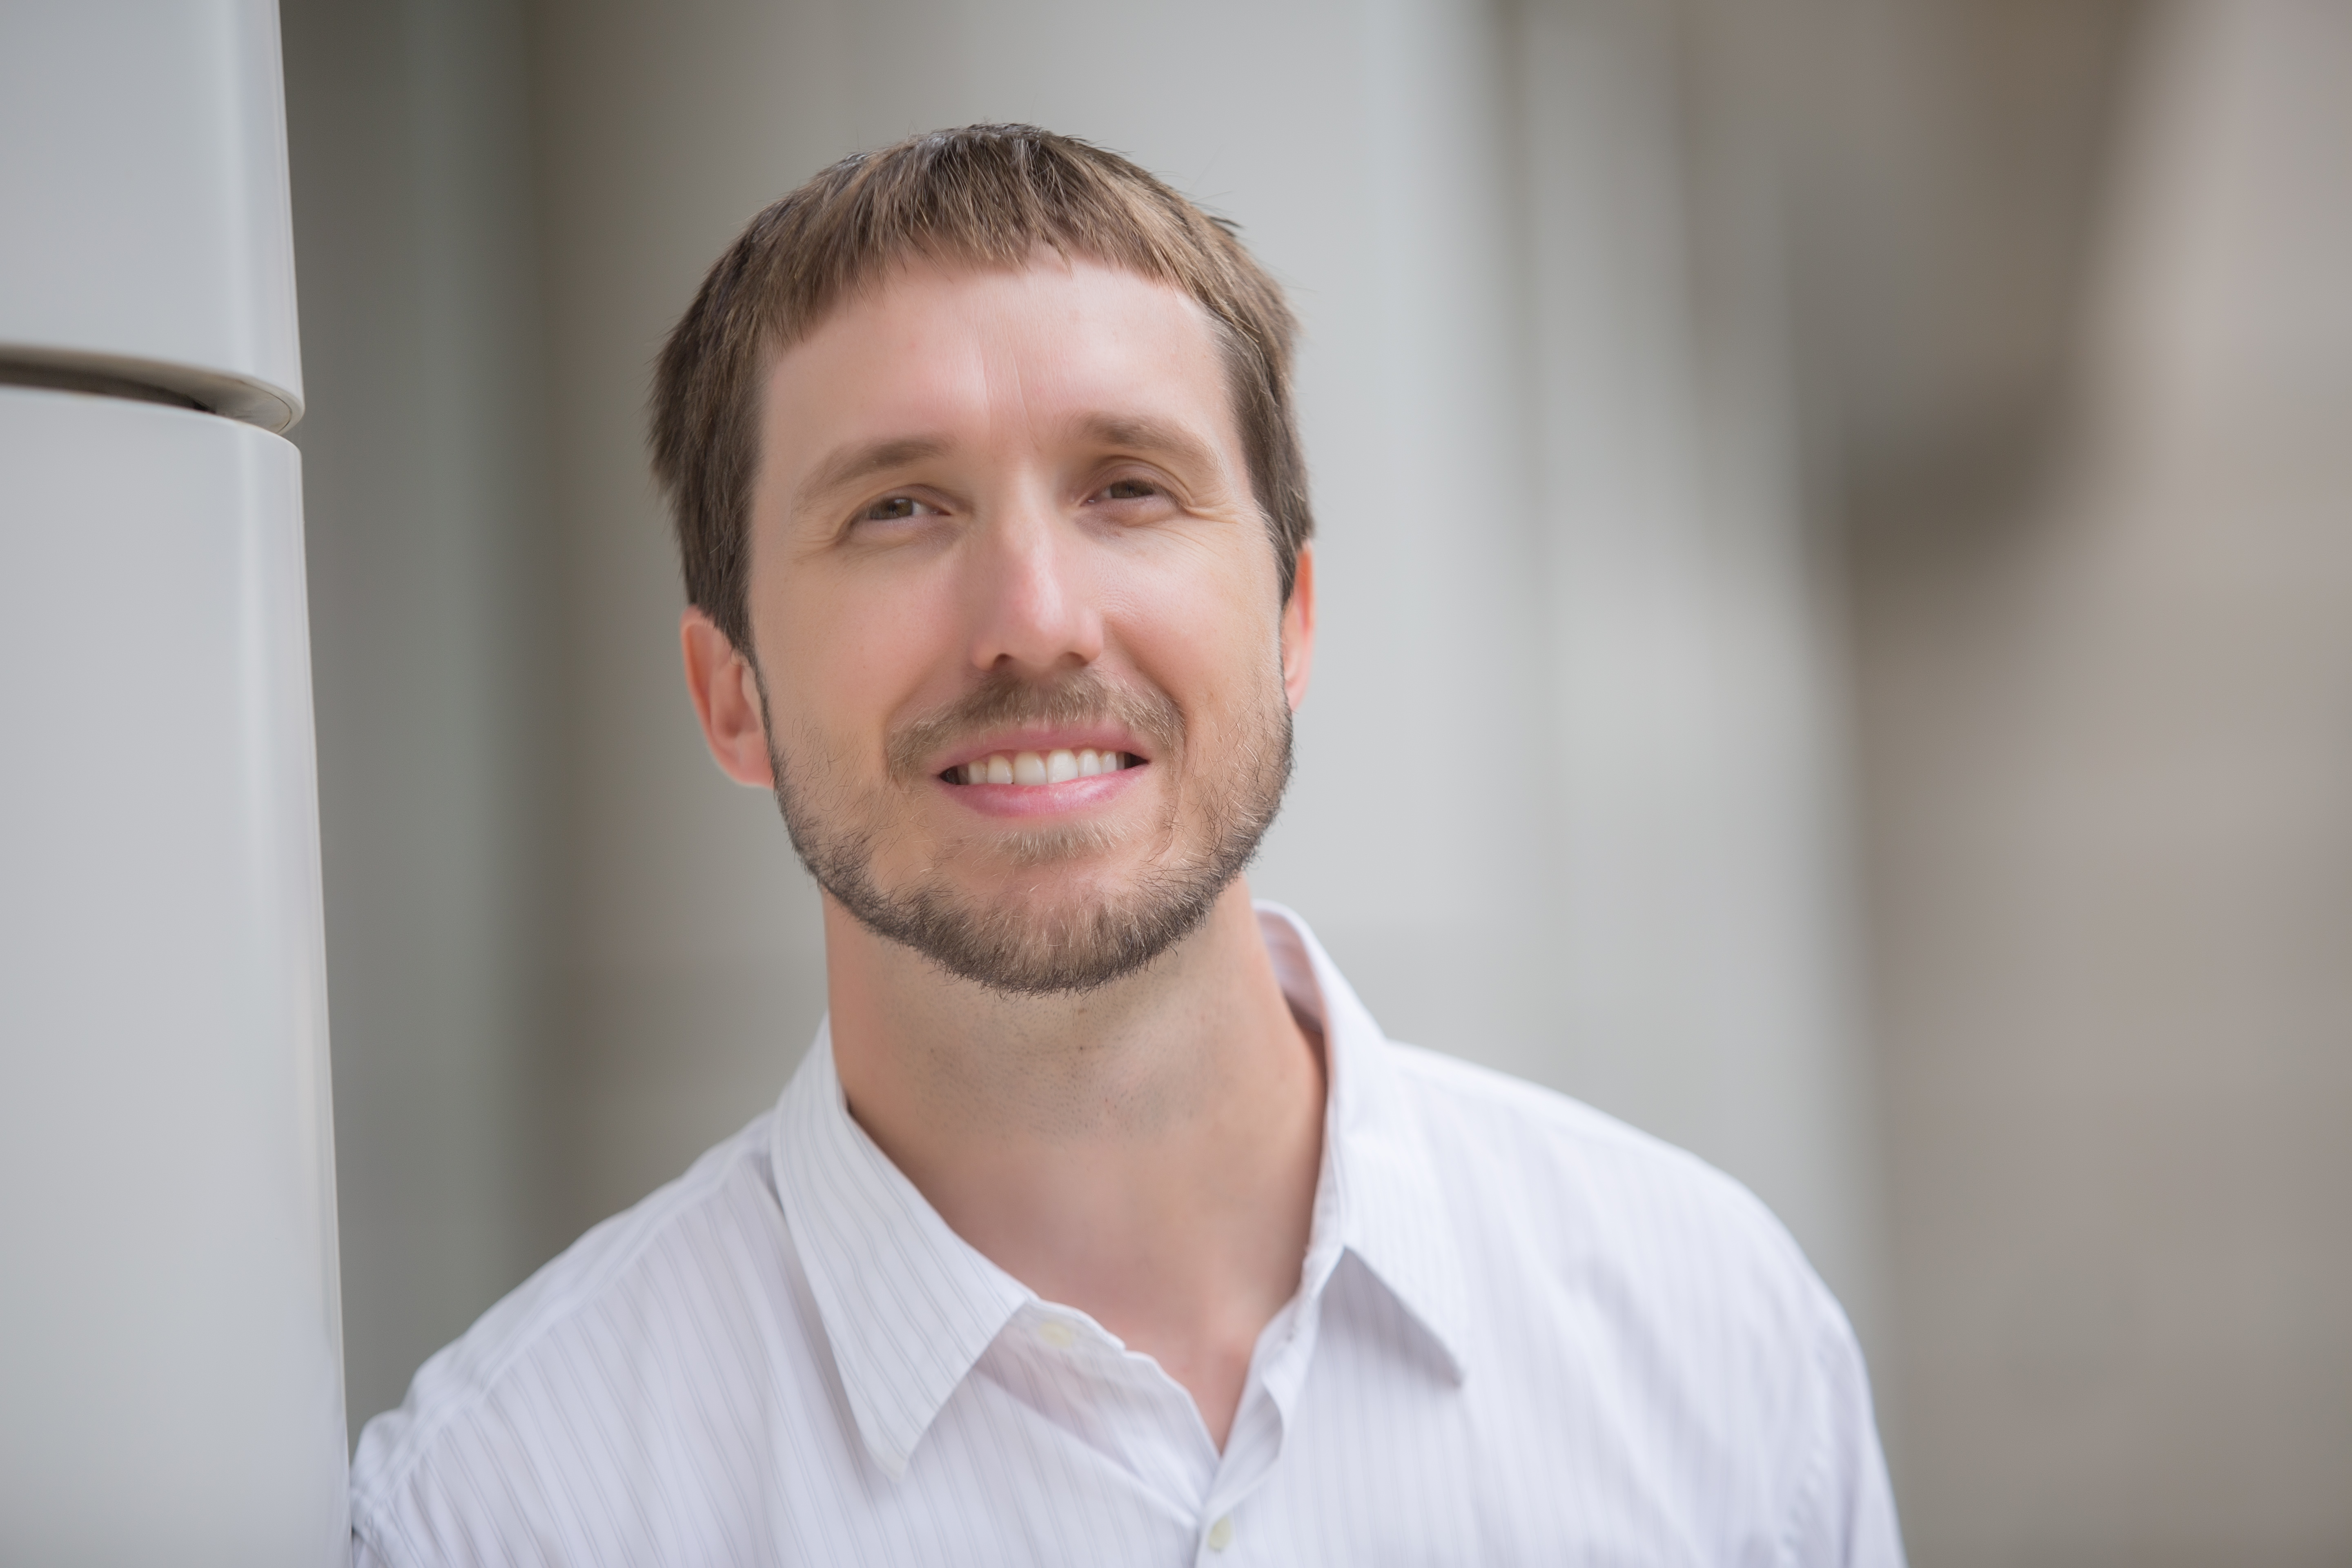 Jeremy Purvis, PhD, is a UNC Lineberger member and assistant professor in the UNC School of Medicine Department of Genetics.